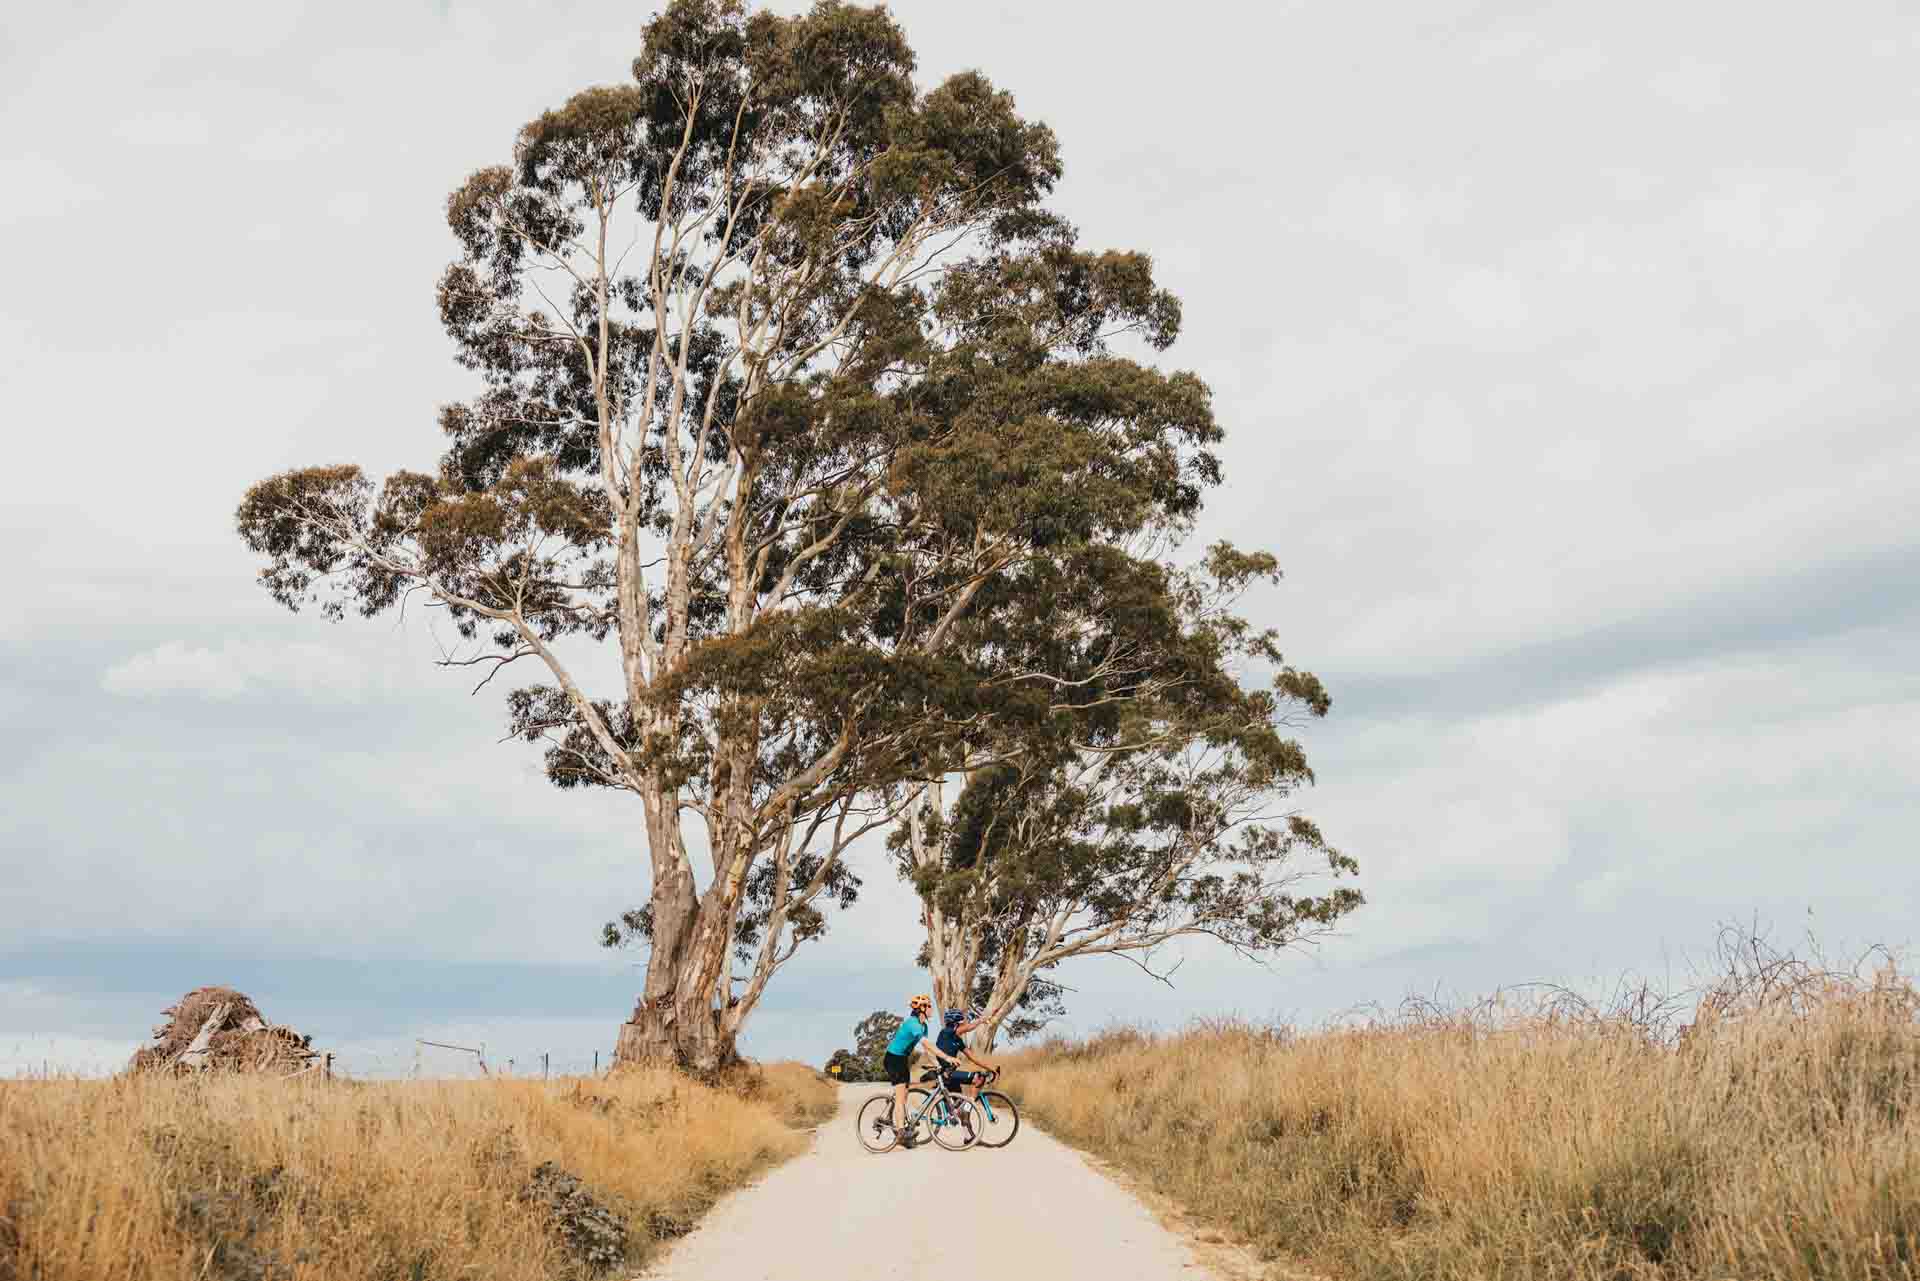 Gravel riding through Musk, photo by Bec Rowlands